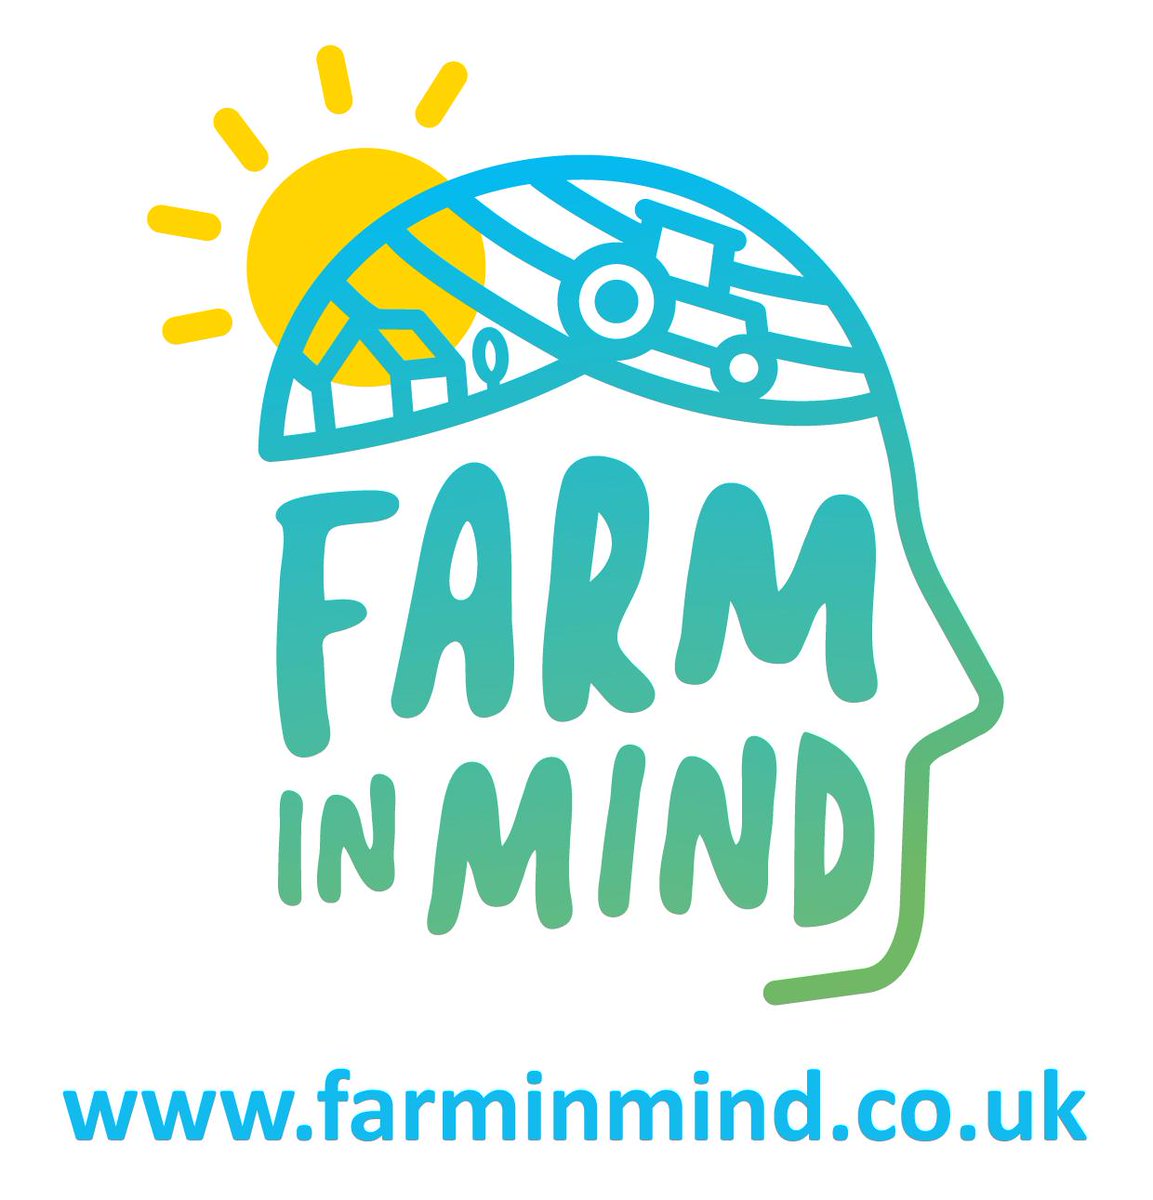 Stress is part of farming life but it is something that needs to be managed. The Farm in Mind website can help you to identify areas of stress and strain in your life and direct you towards getting specific help and support: farminmind.co.uk